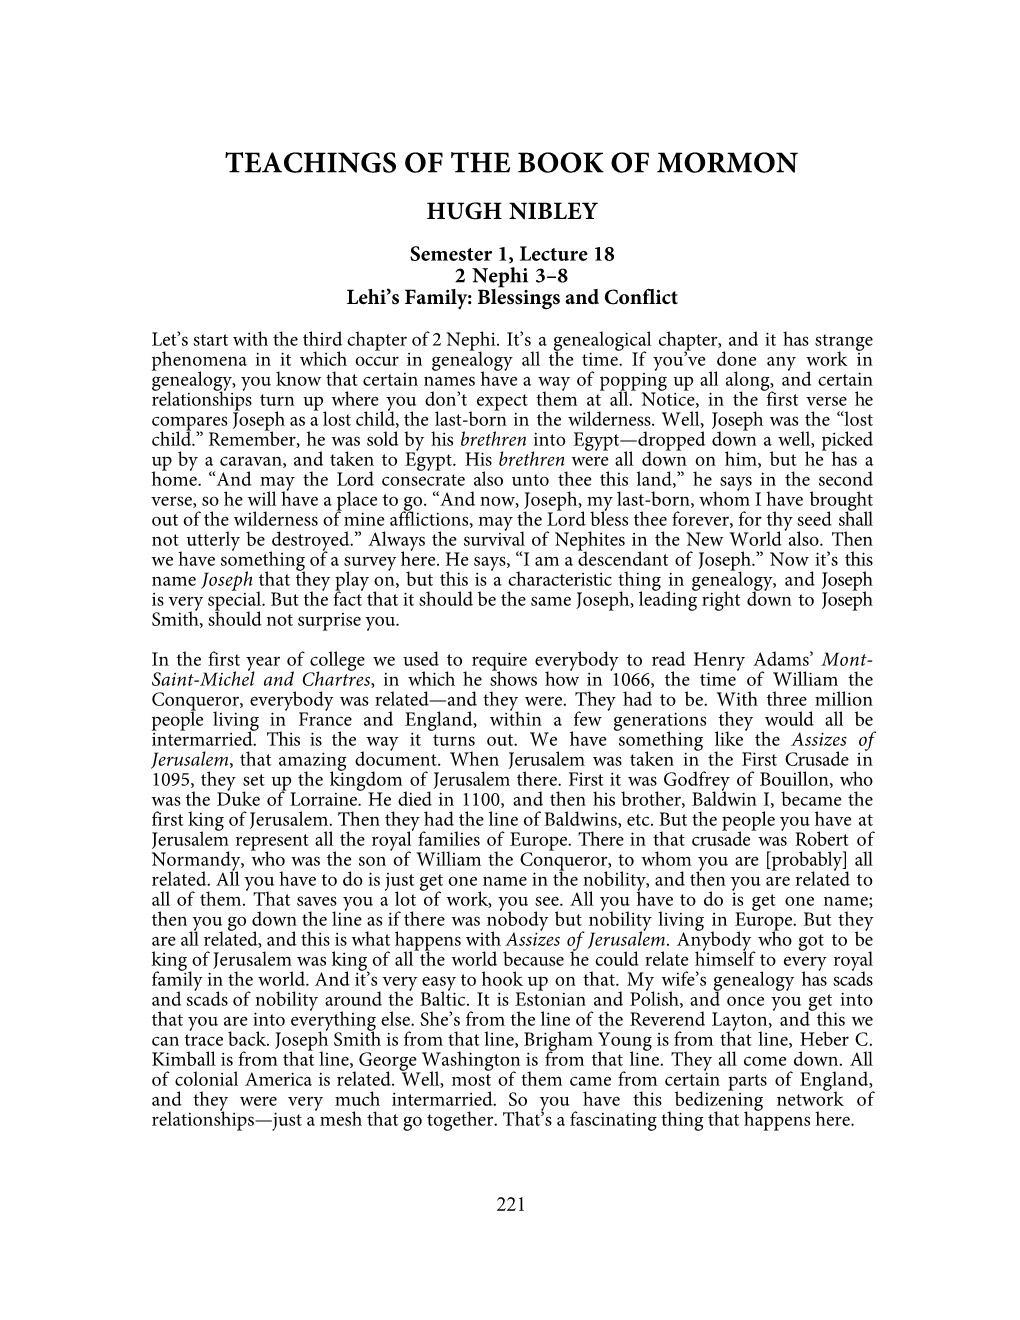 TEACHINGS of the BOOK of MORMON HUGH NIBLEY Semester 1, Lecture 18 2 Nephi 3–8 Lehi’S Family: Blessings and Conflict